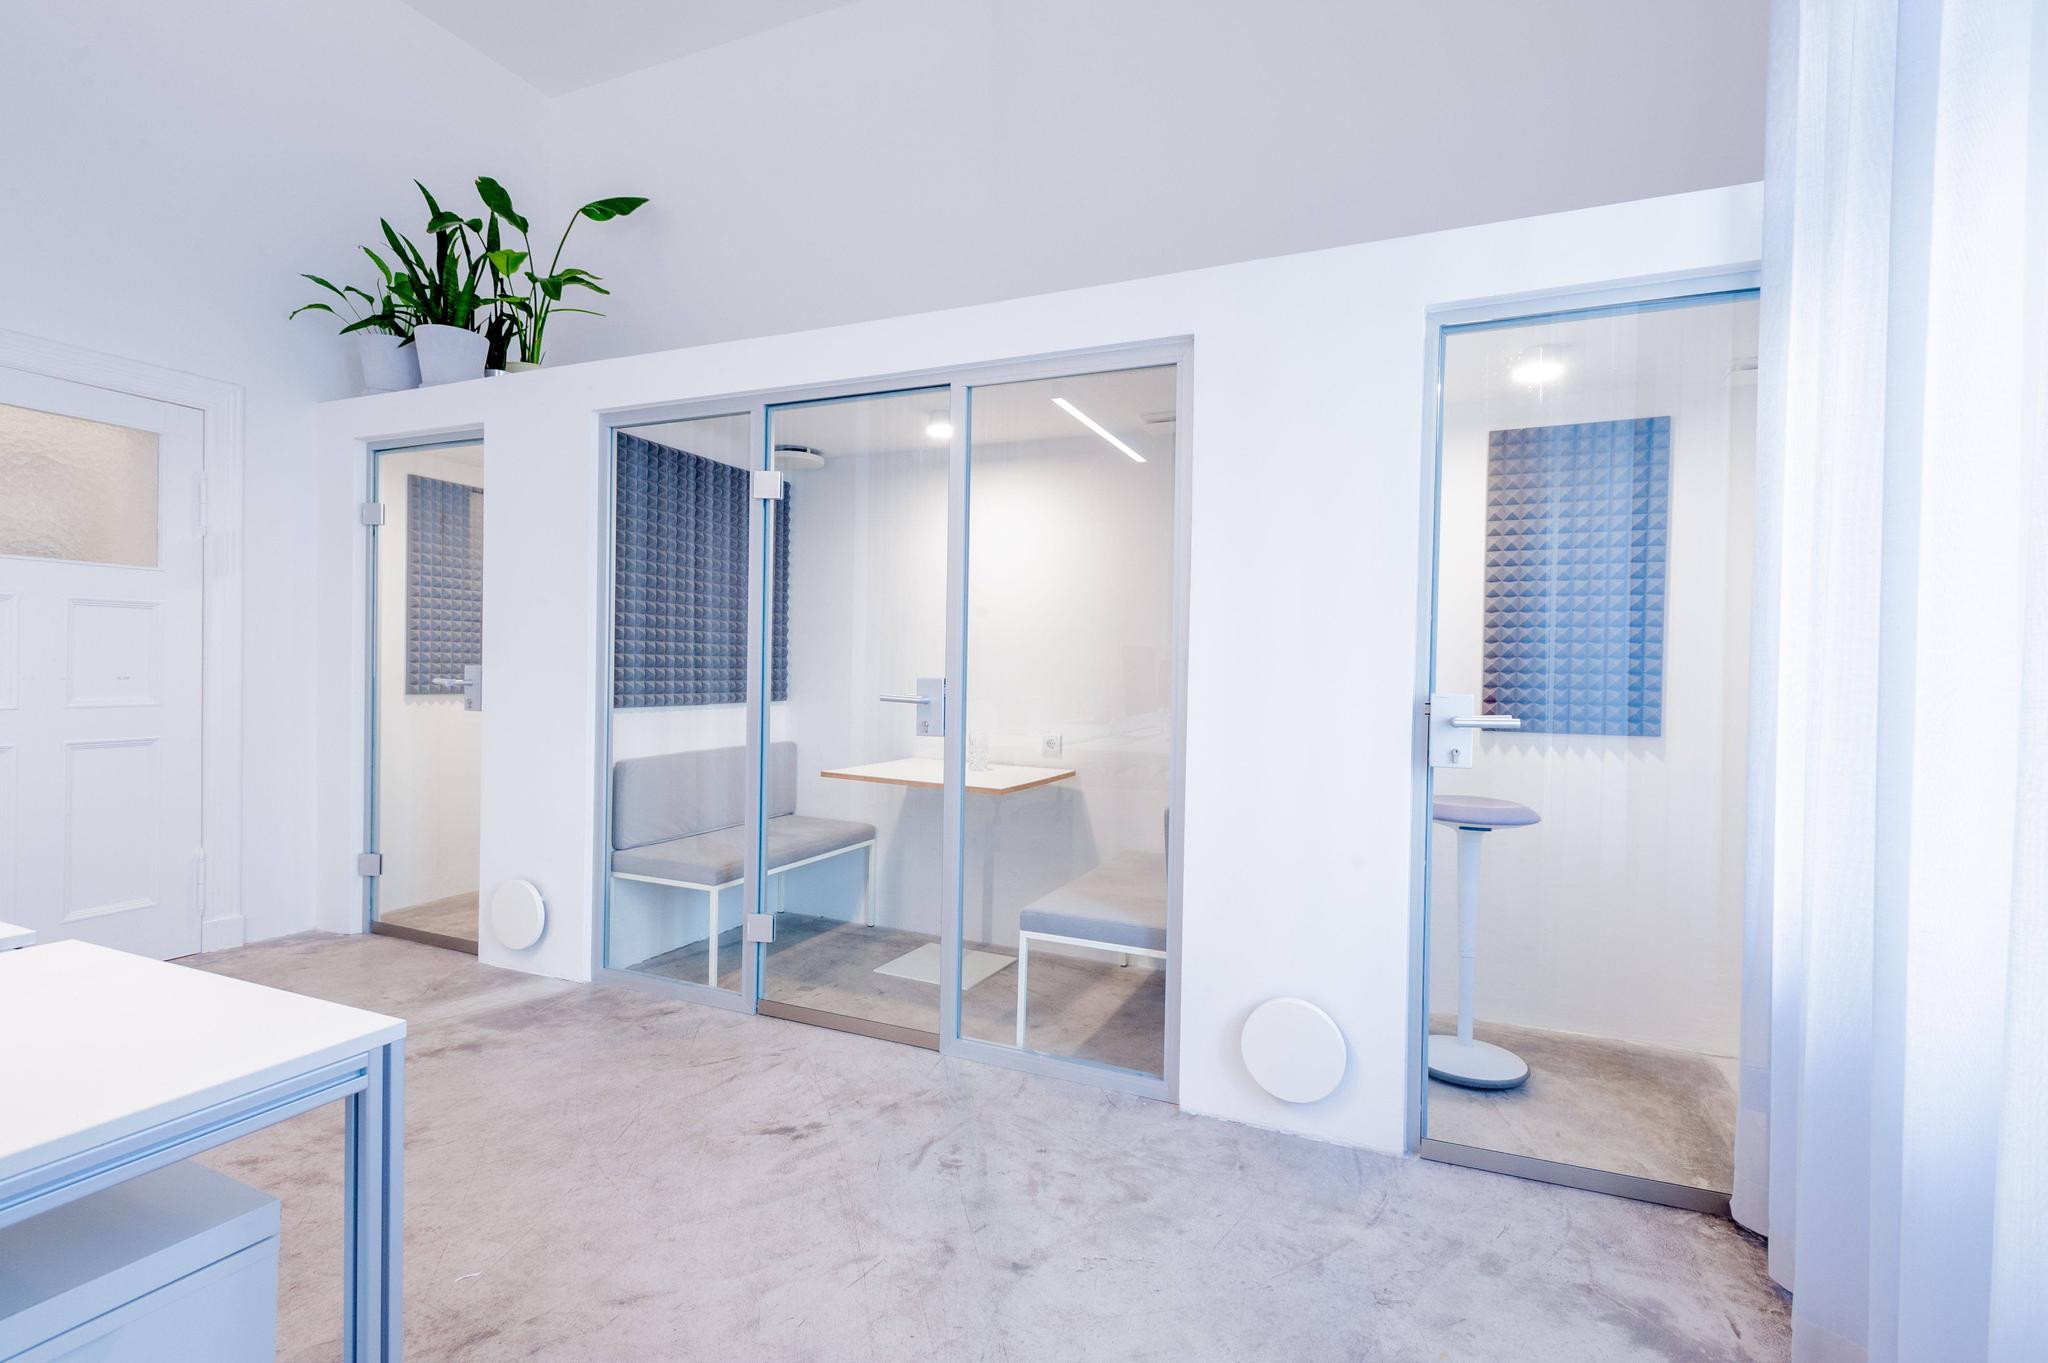 3 meeting cabins with glass doors in a white, sleek and open hybrid office space. 2 potted plants are on top of the meeting cabins.